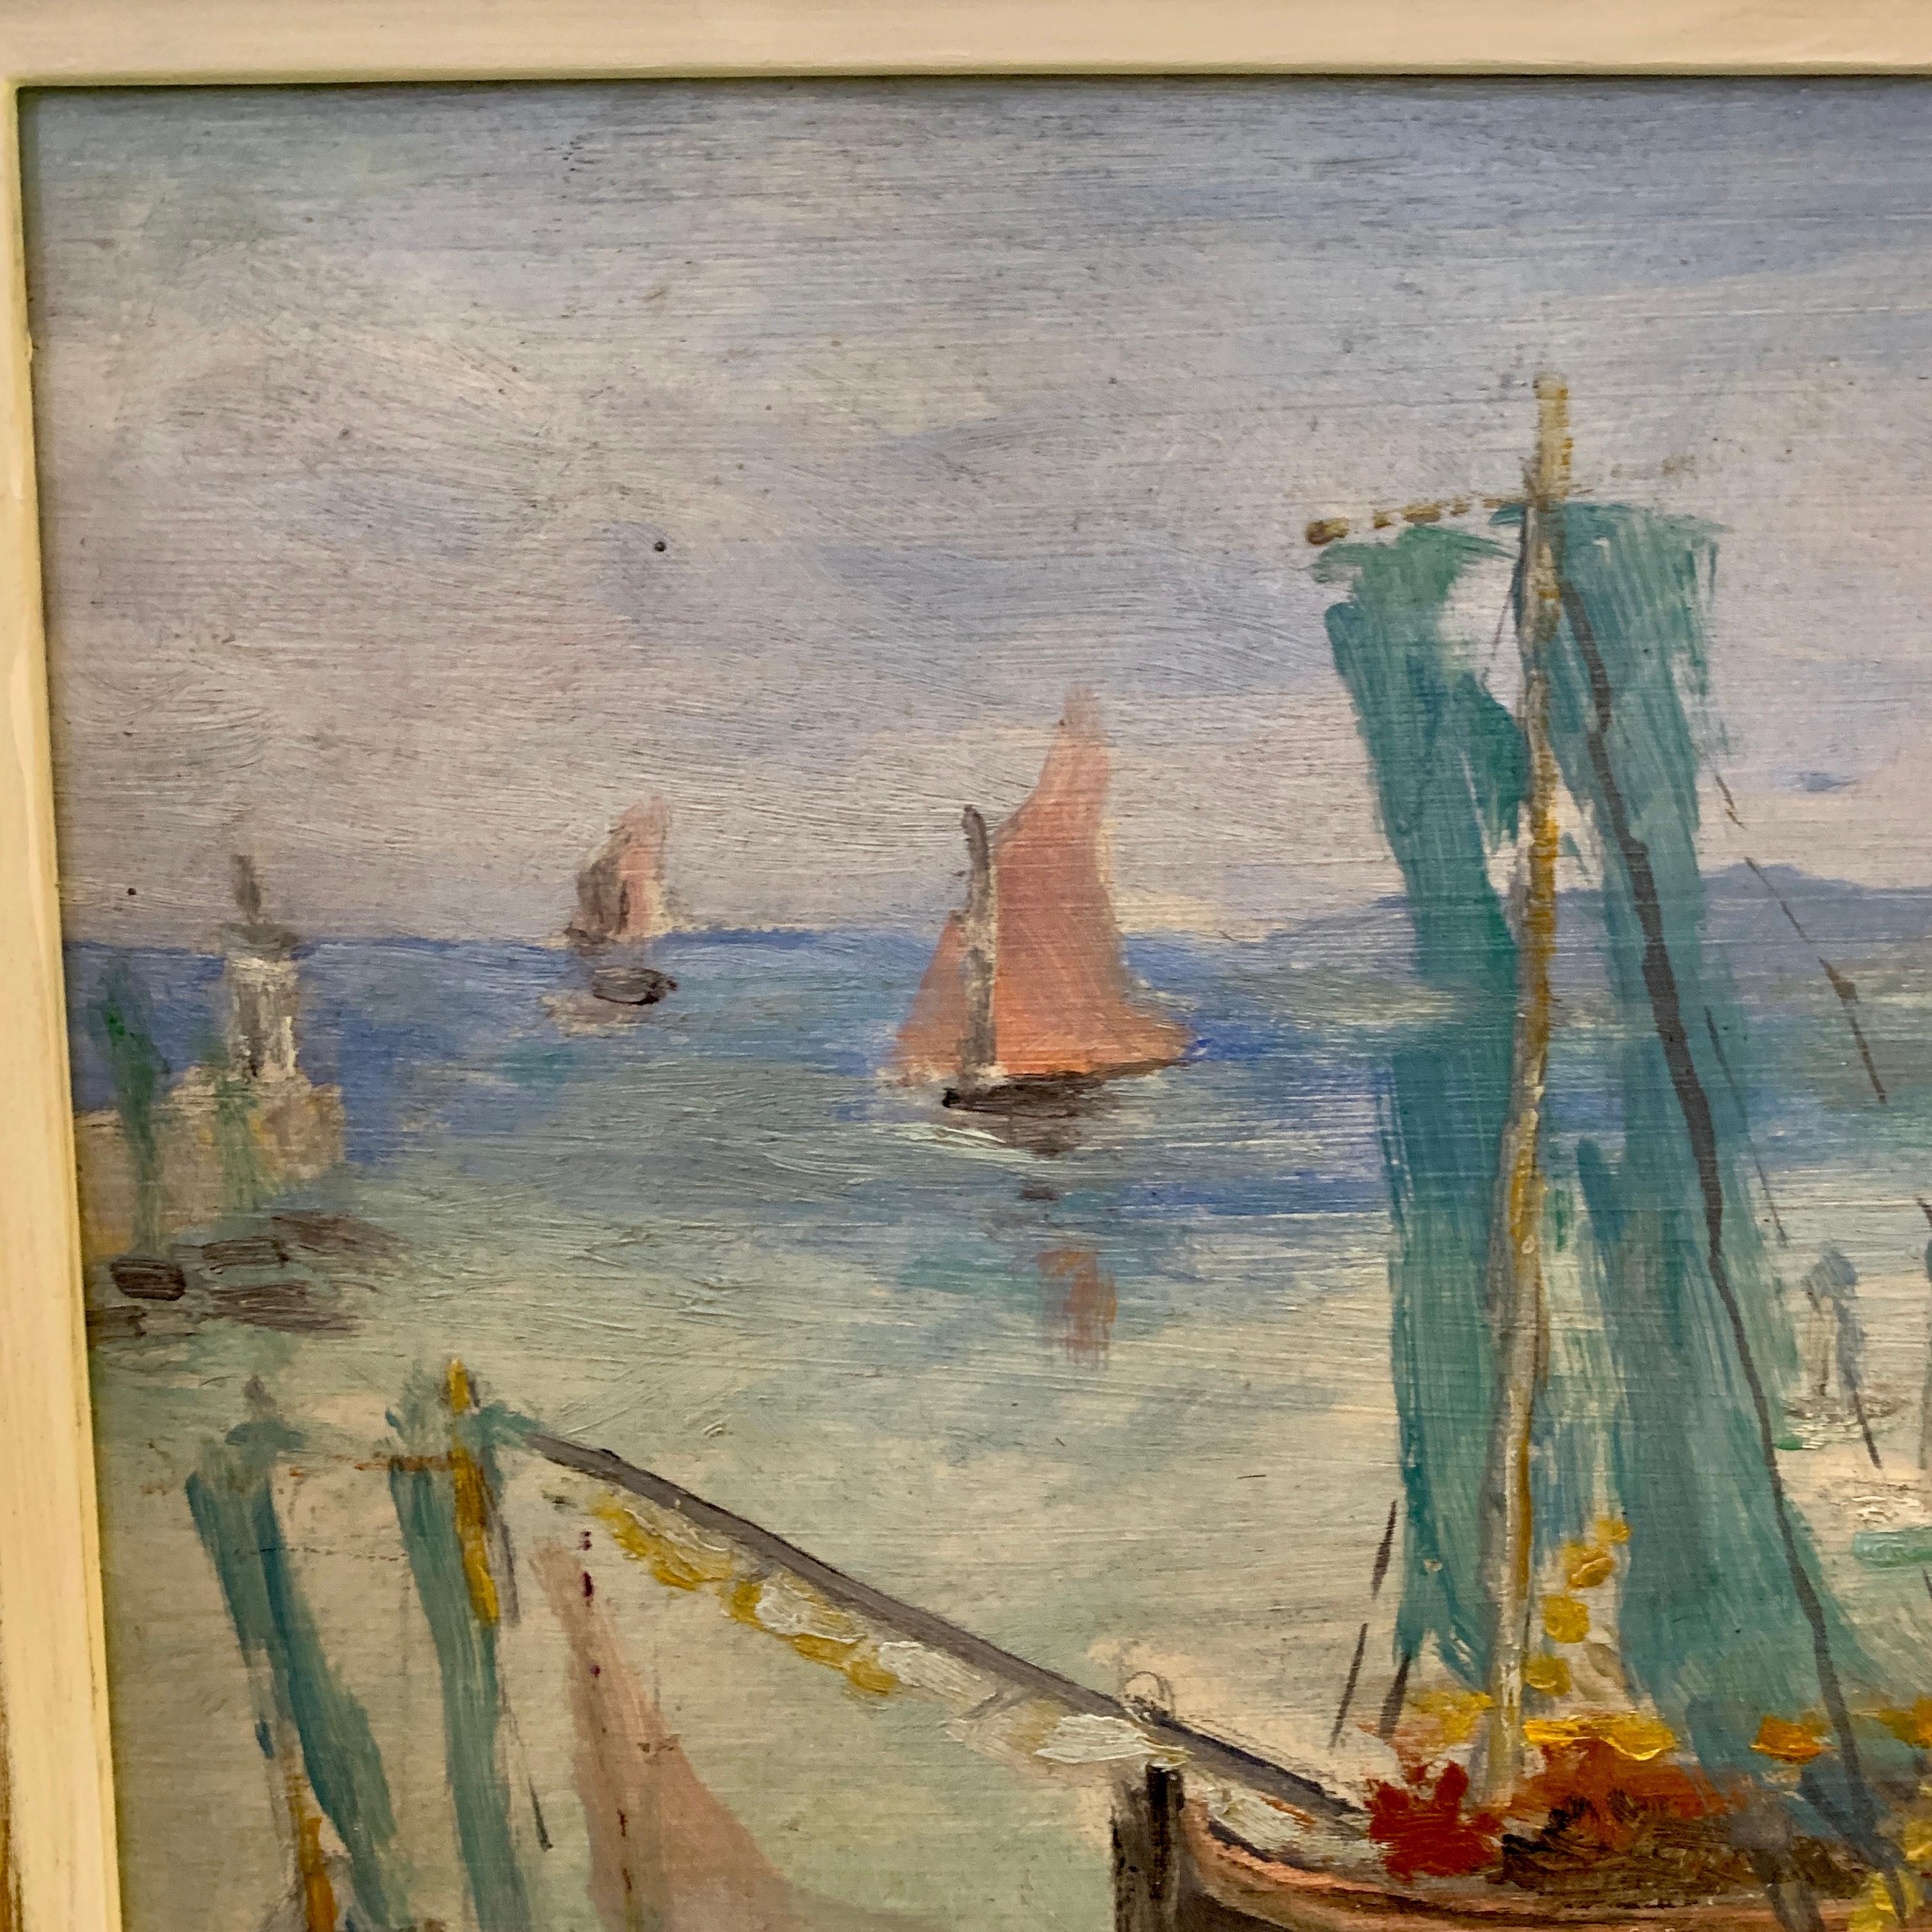 French 20th-century Impressionist harbor, with fishing boats at sea, with landscape beyond.

 20th-century French impressionist harbor scene.

The artist has achieved a very decorative image with the use of complementary colors throughout the